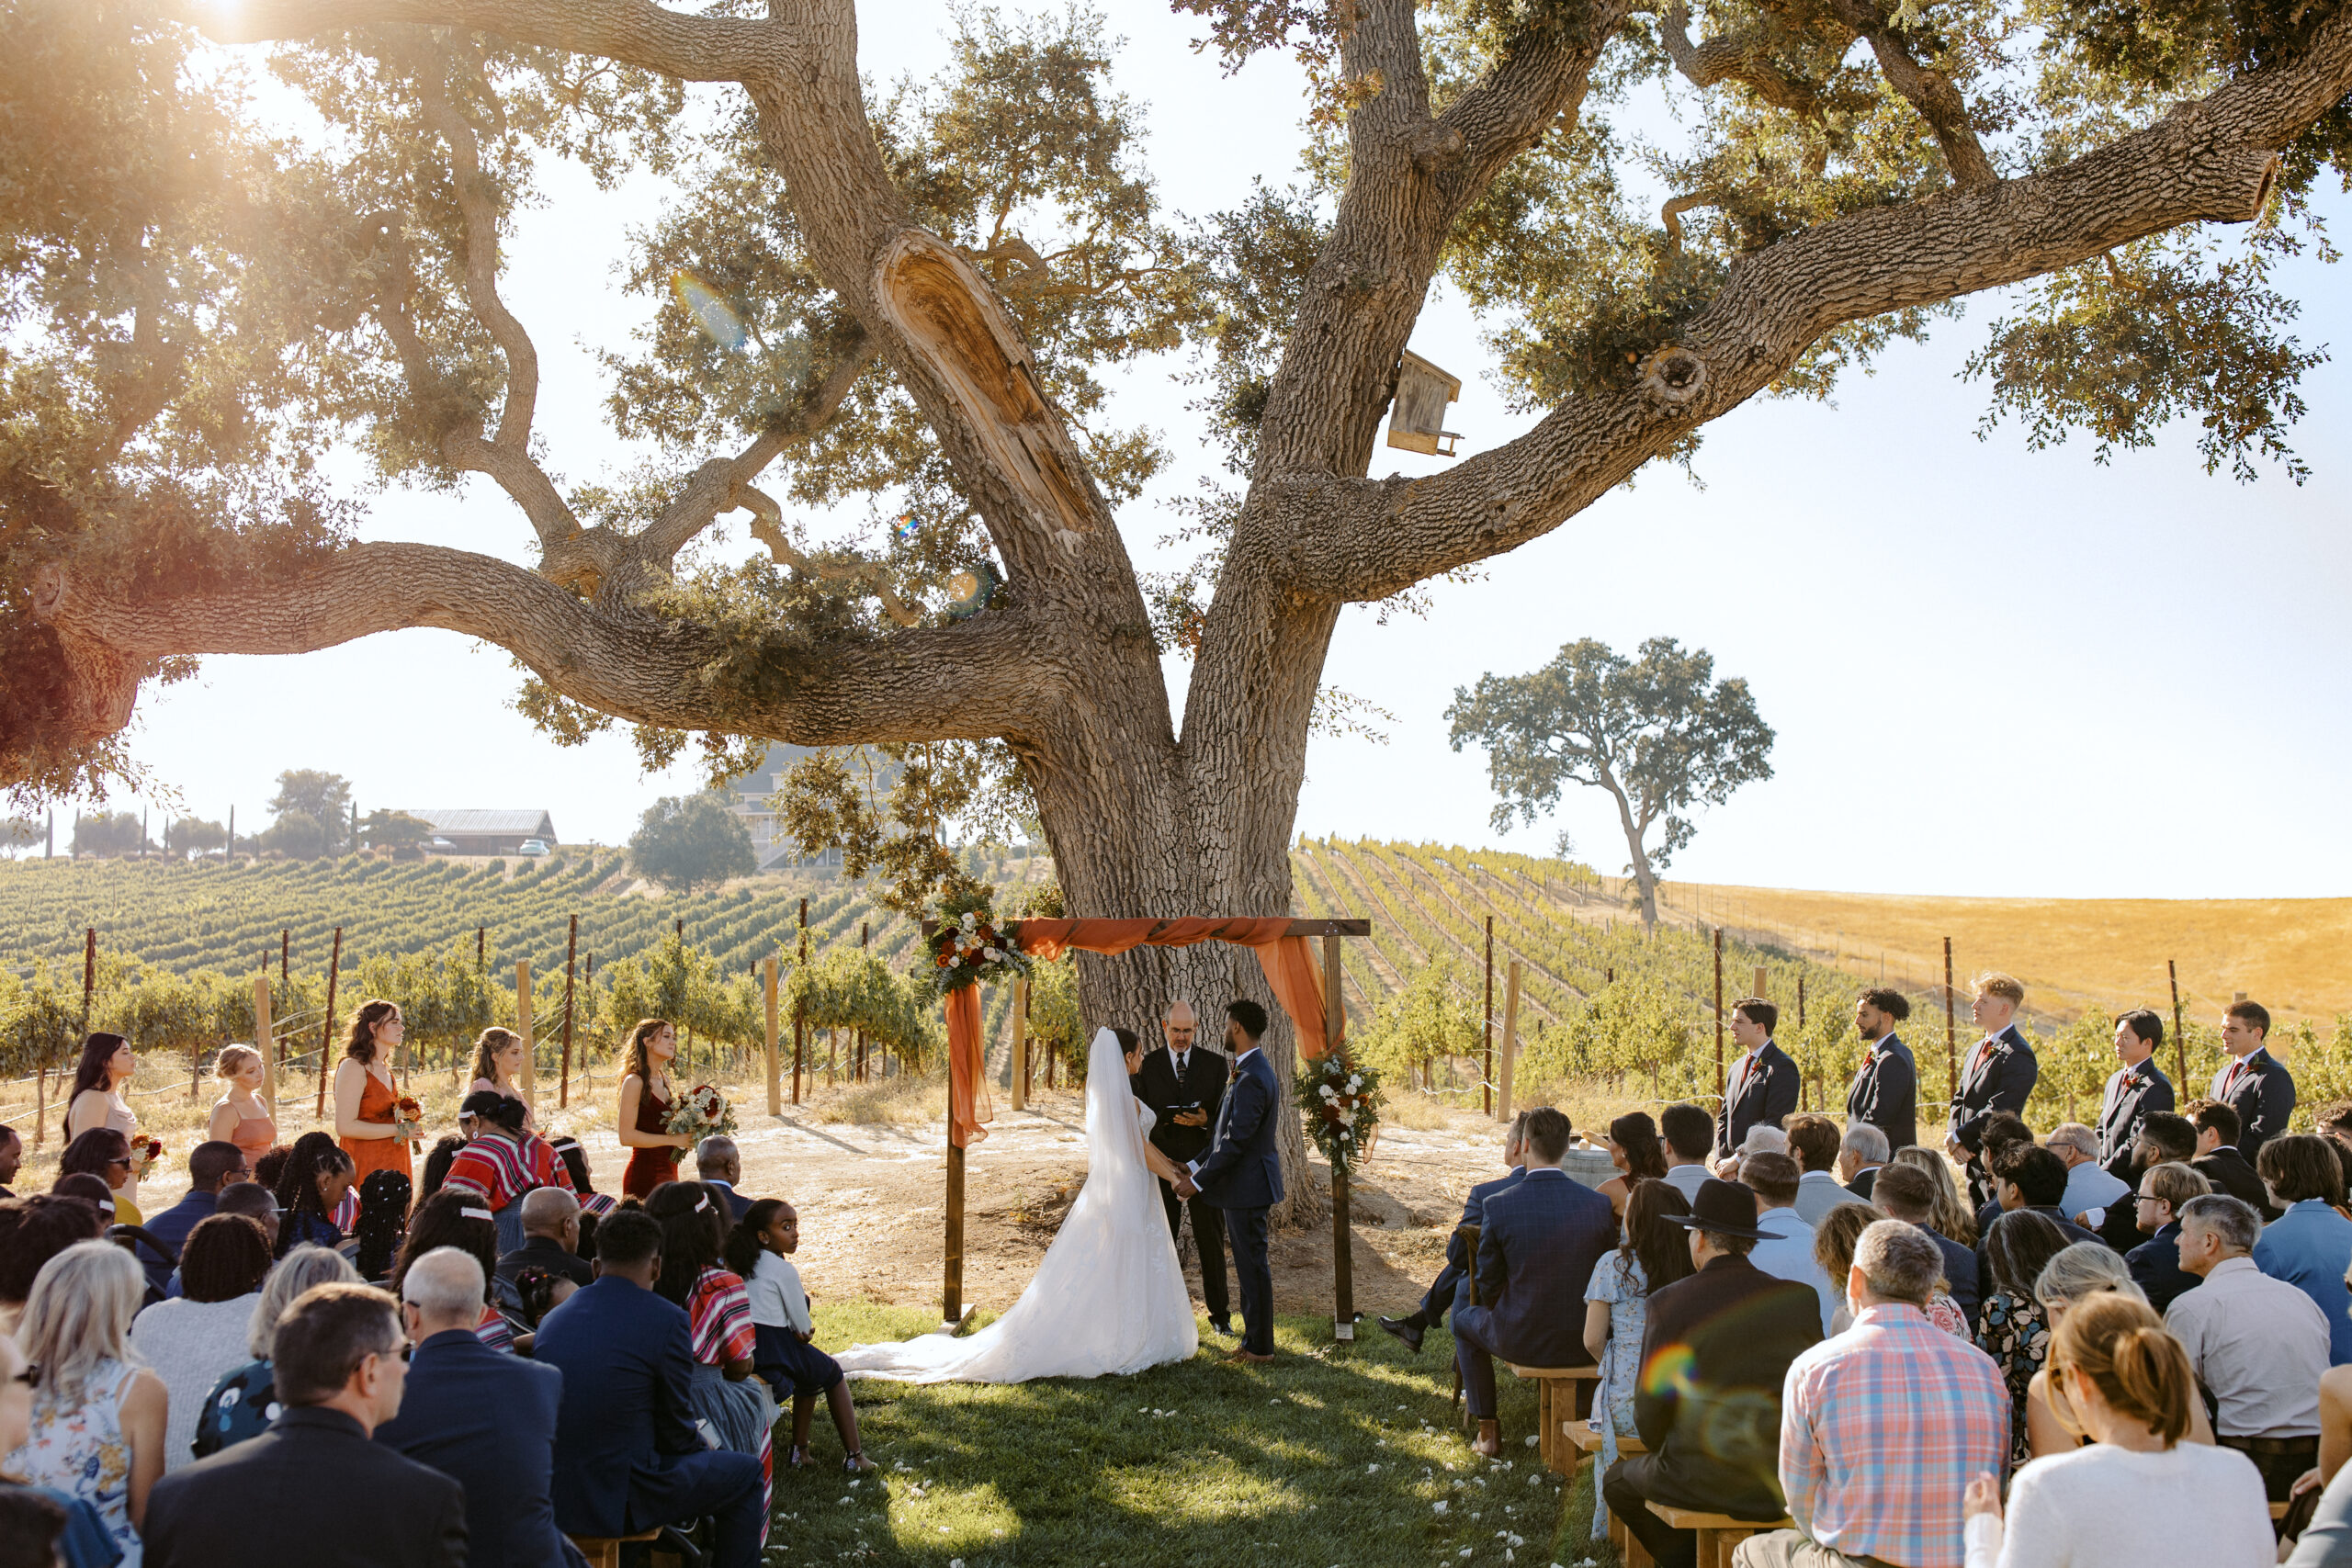 Couples exchange vows underneath beautiful oak tree in Paso Robles, California